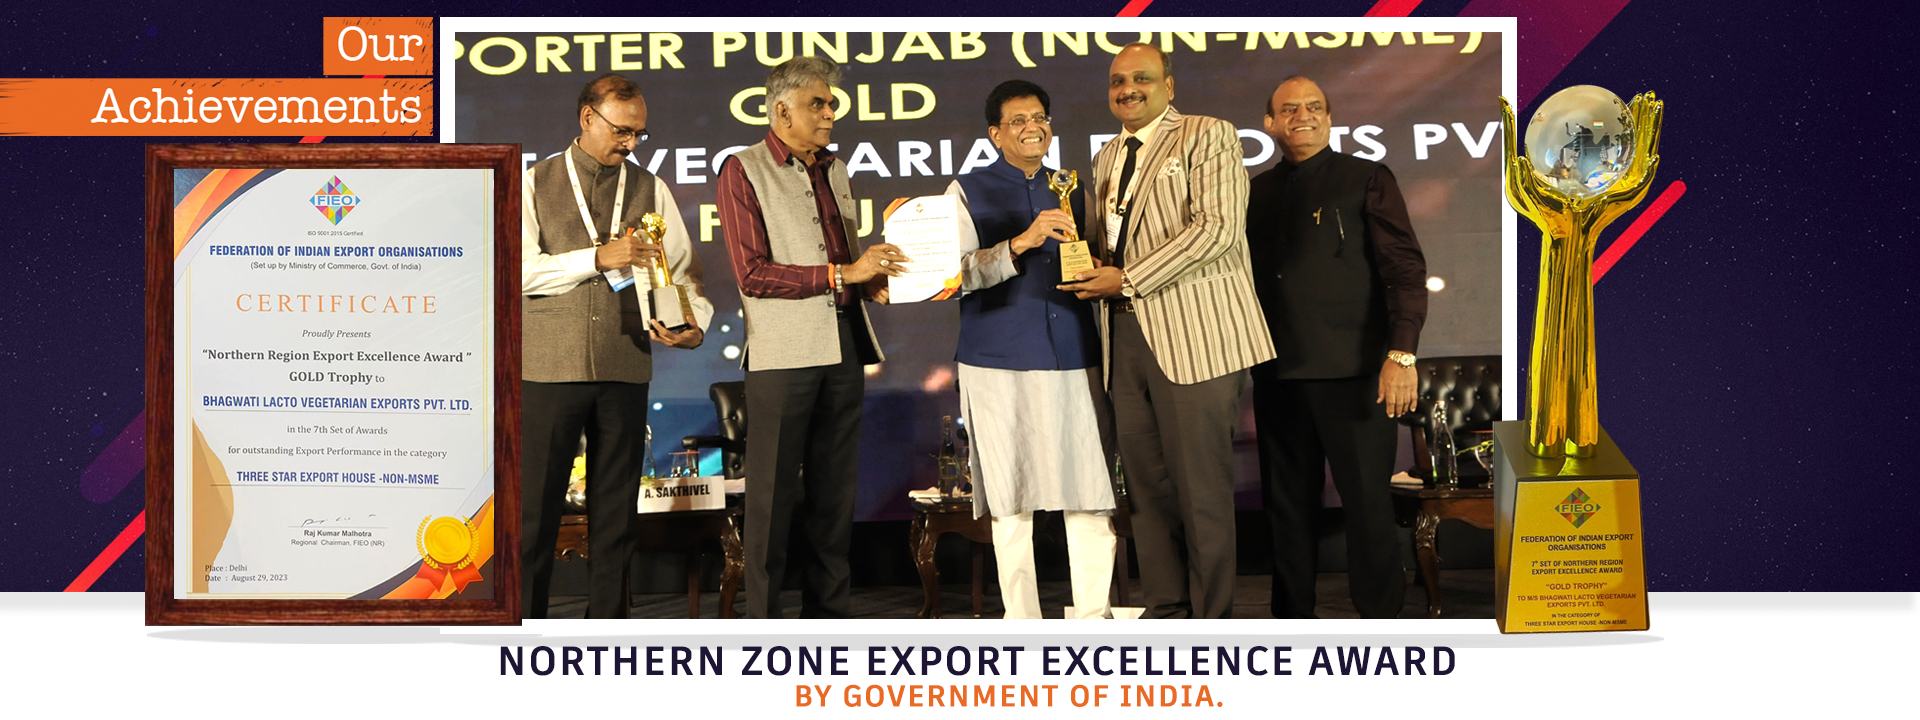 Northern Zone Export Excellence Award